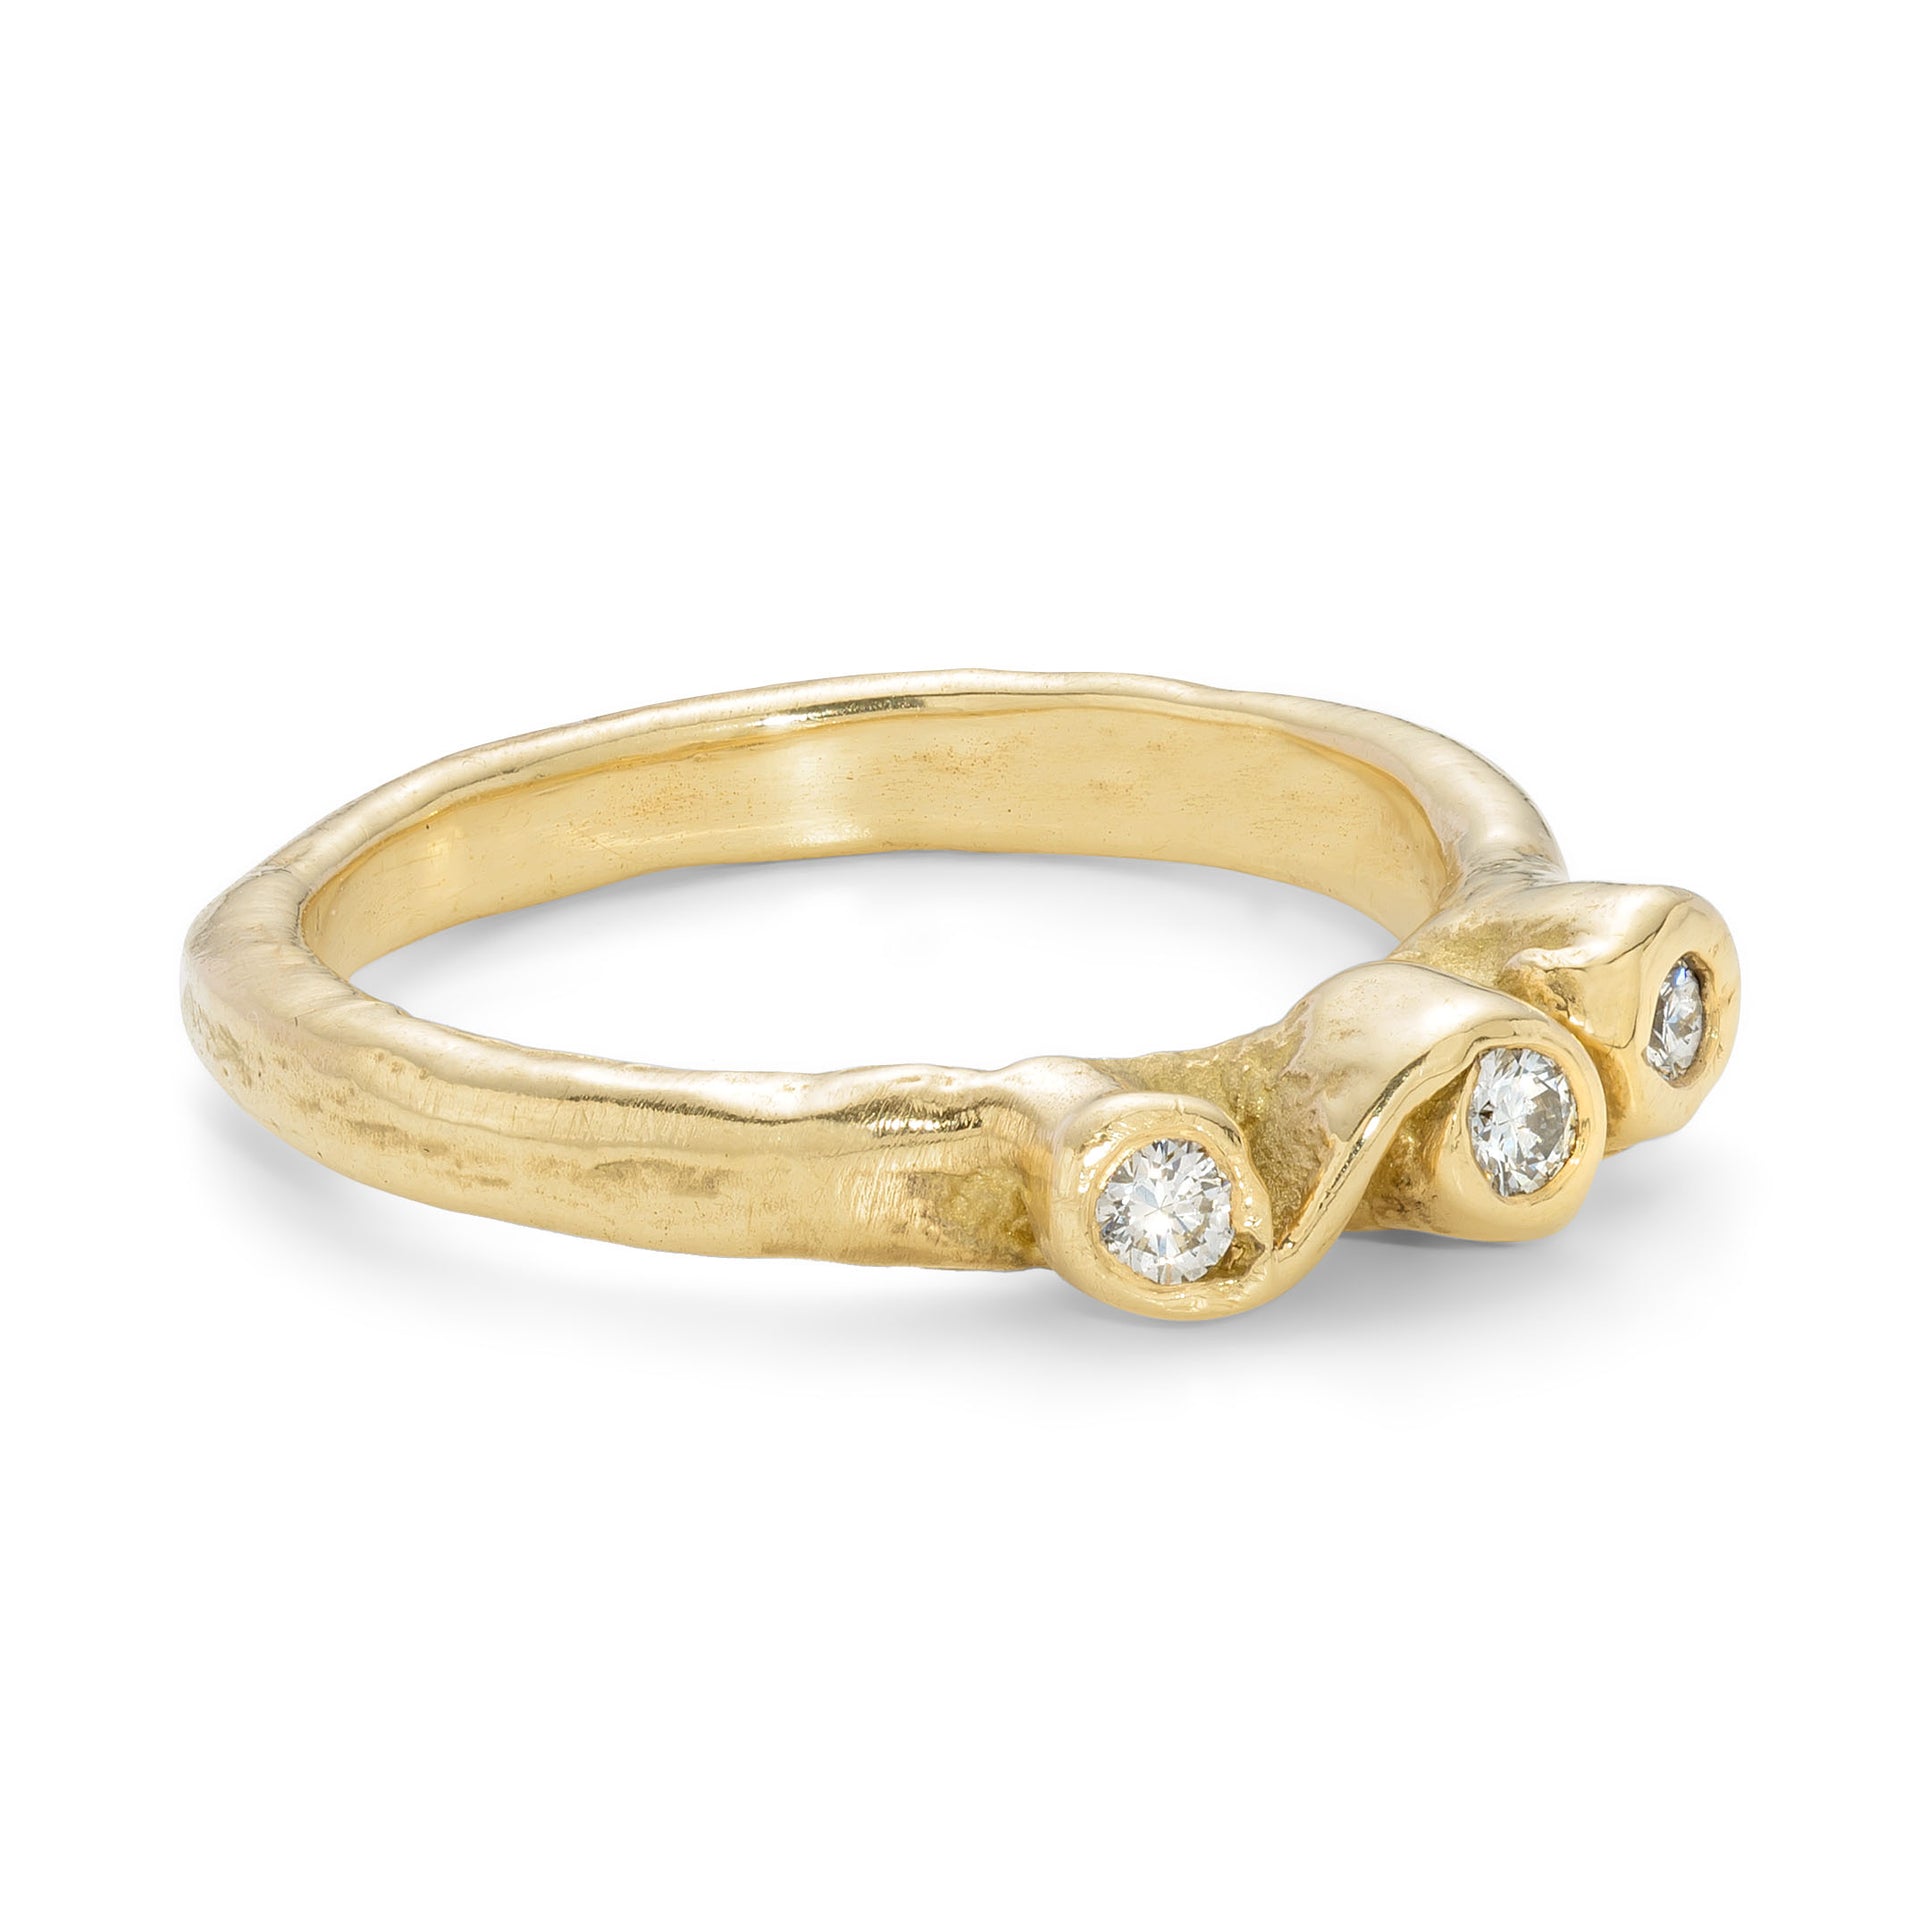 Side view of an 18ct gold, 3 diamond Emily Nixon engagement ring.